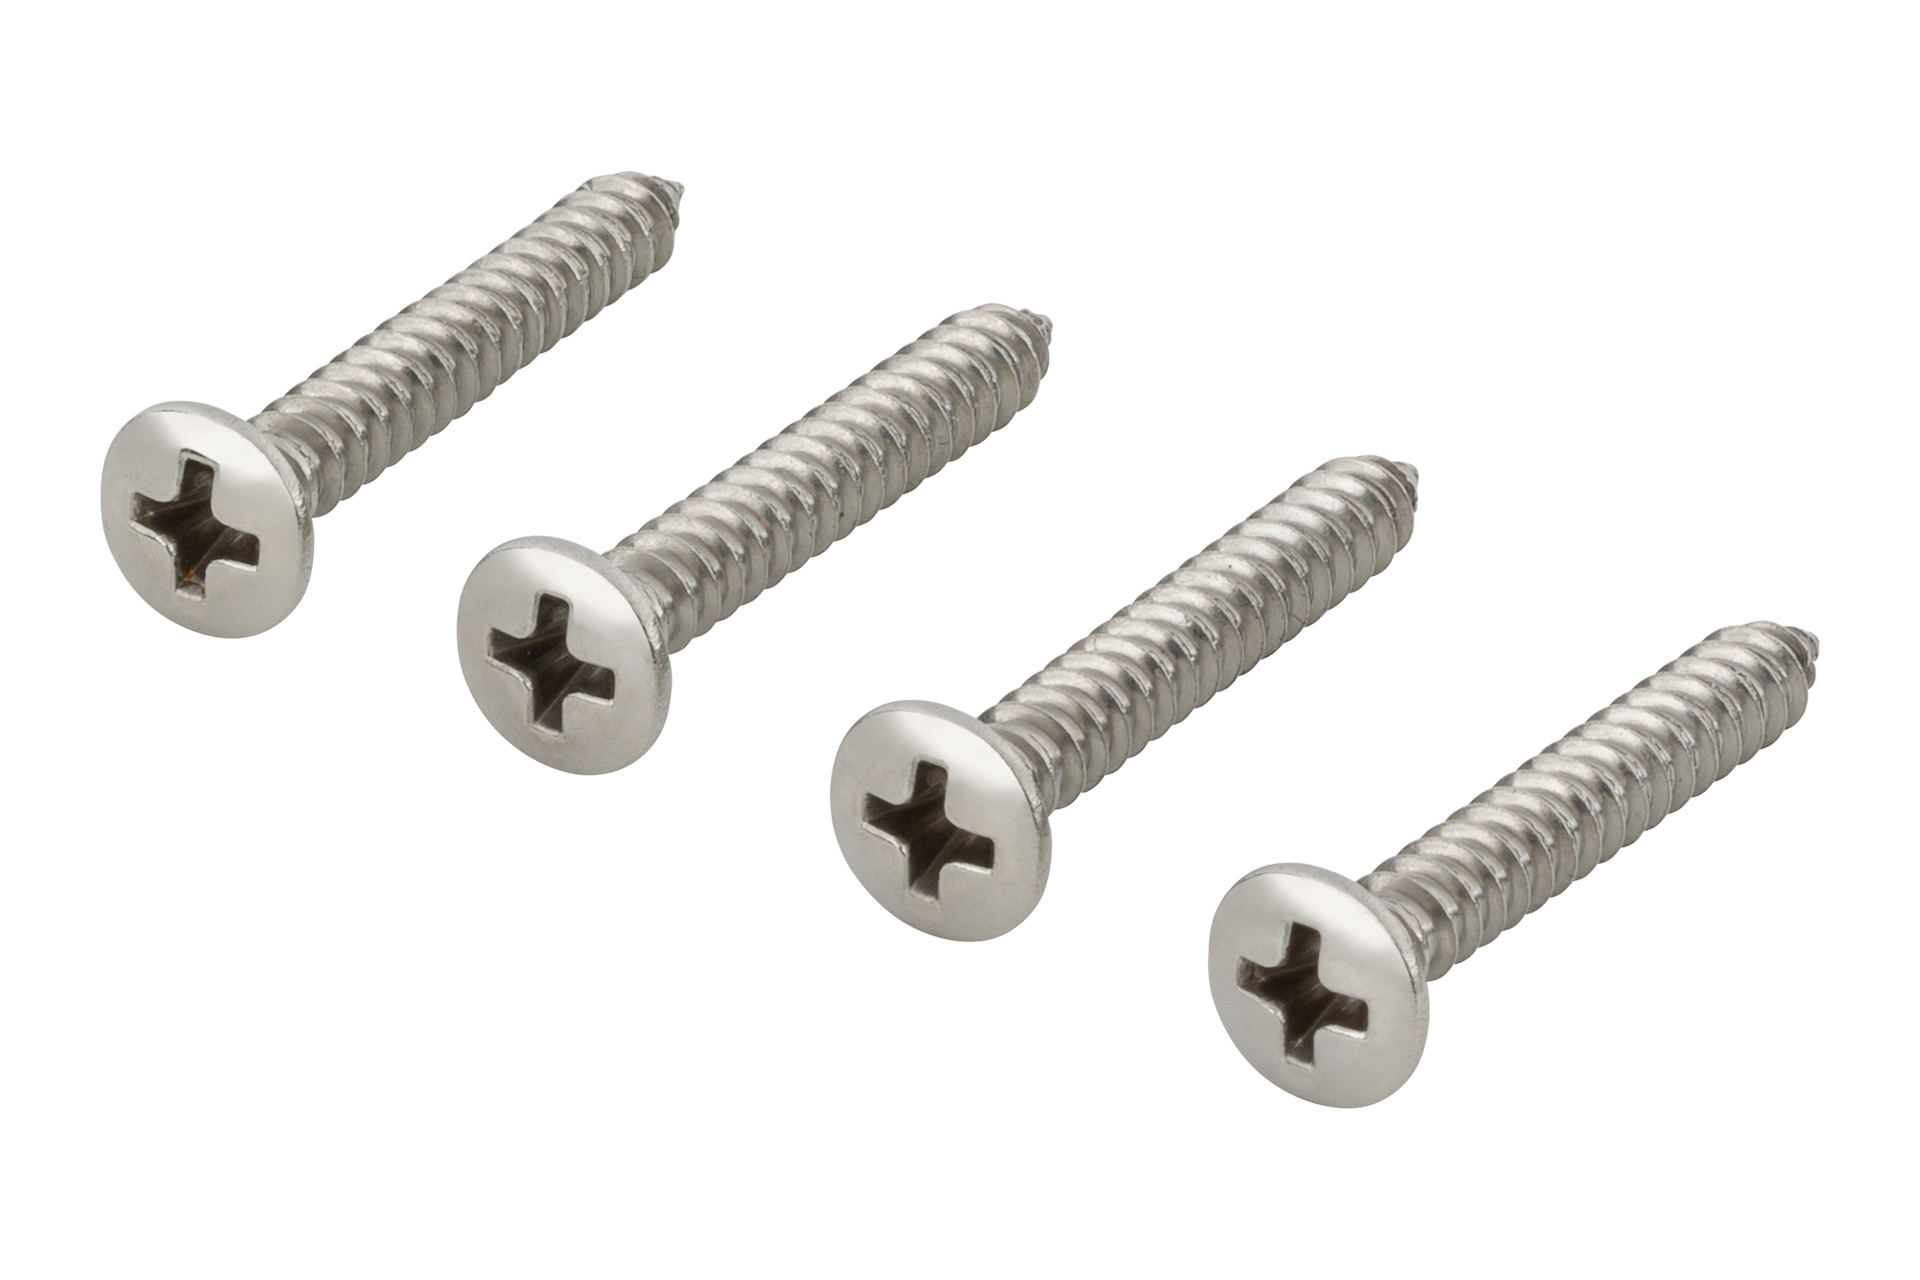 Framus & Warwick Parts - Countersunk Short Screws for Bolt-On Neck, 4,2 mm x 30 mm, 4 pcs. - Stainless Steel